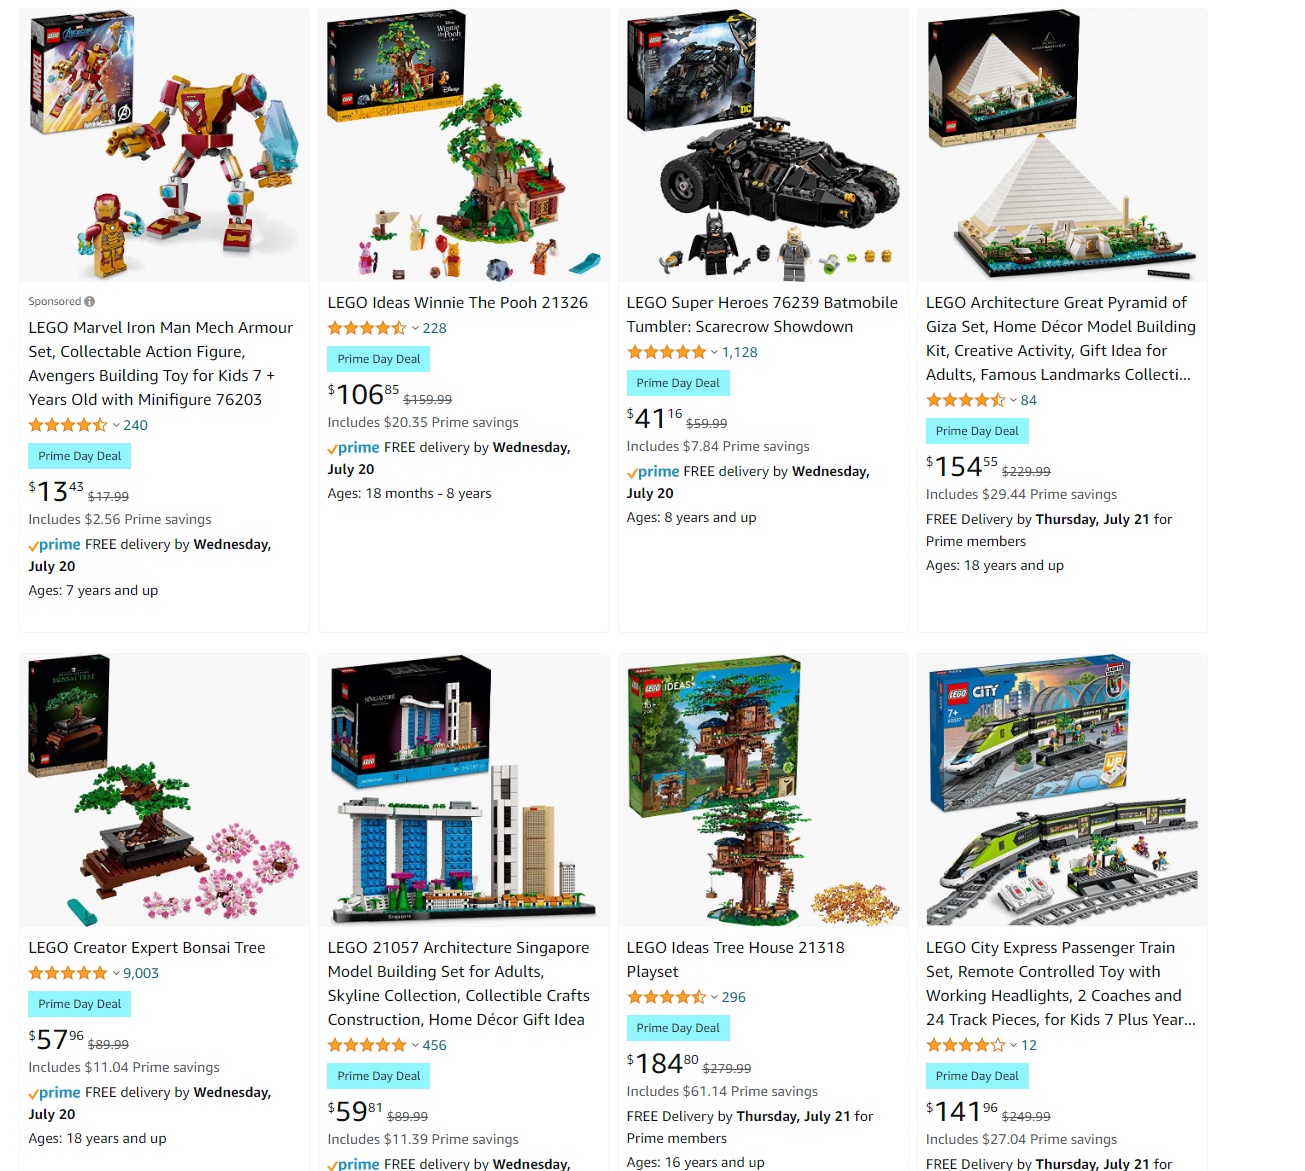 LEGO  Prime Early Access Sale Now Live - October 2022 - The